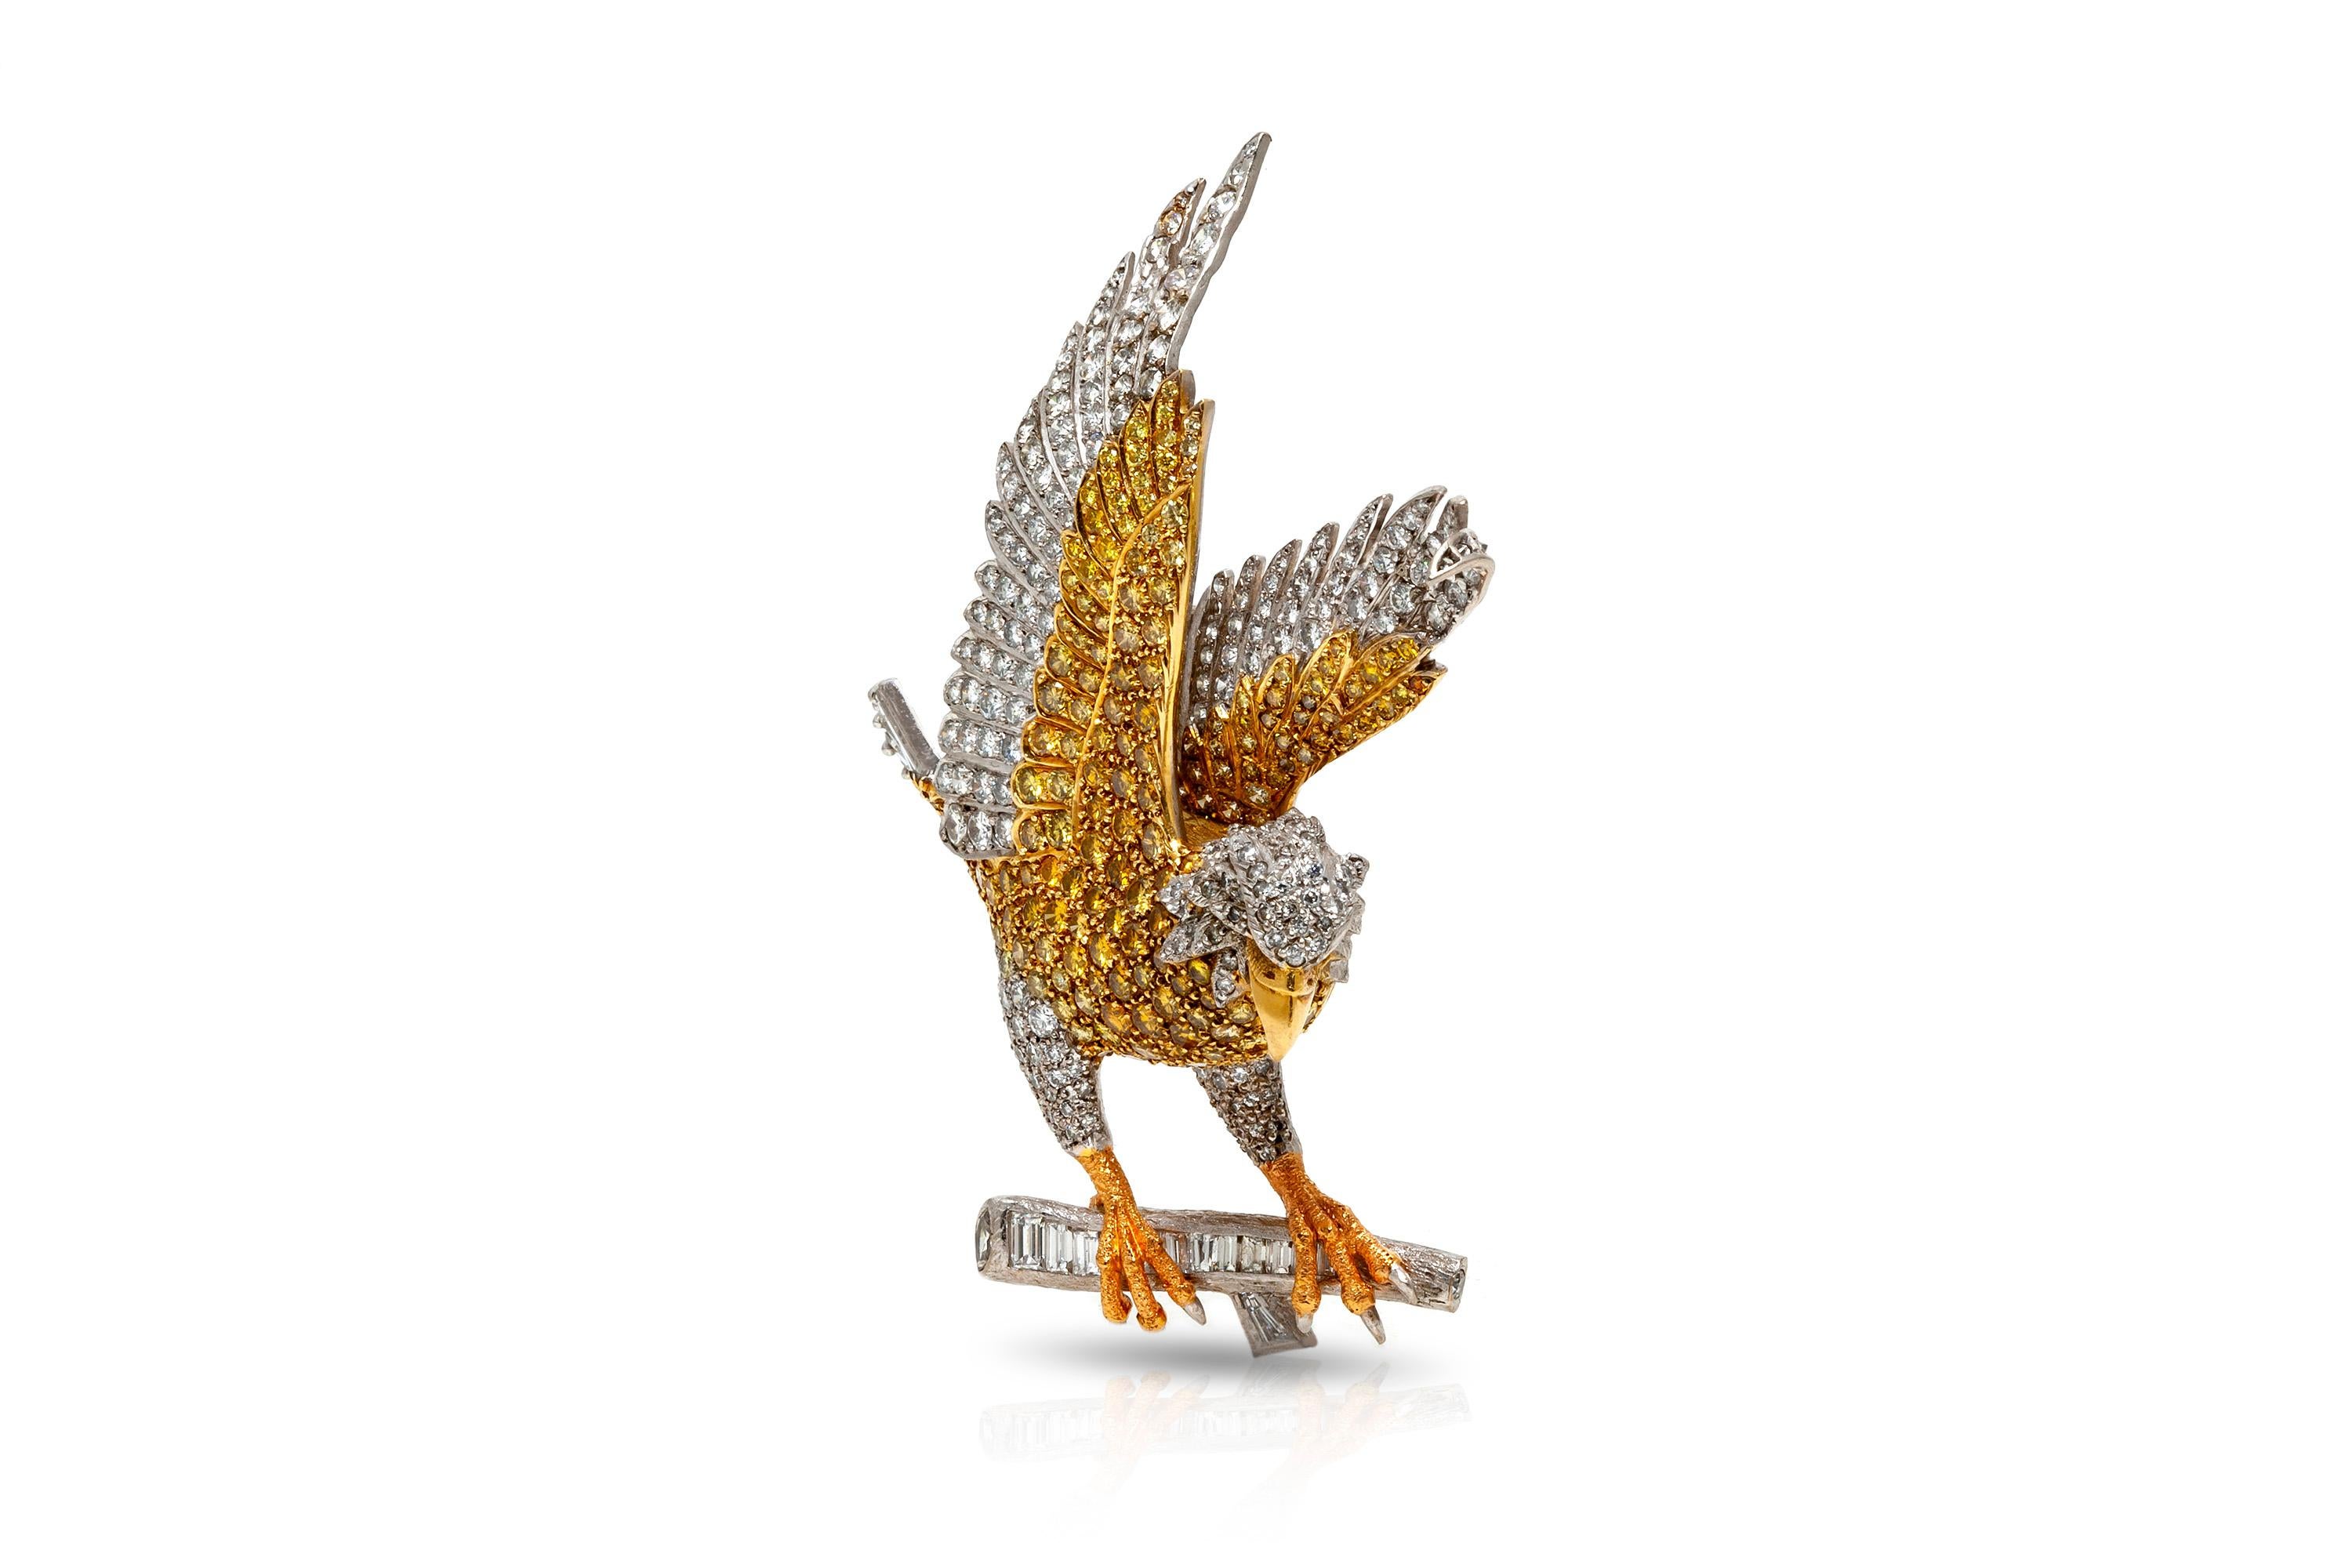 American eagle brooch, finely crafted in 18k yellow and white gold, featuring approximately a total of 11.00 carats of yellow diamonds and approximately a total of 10.00 carats of diamonds.